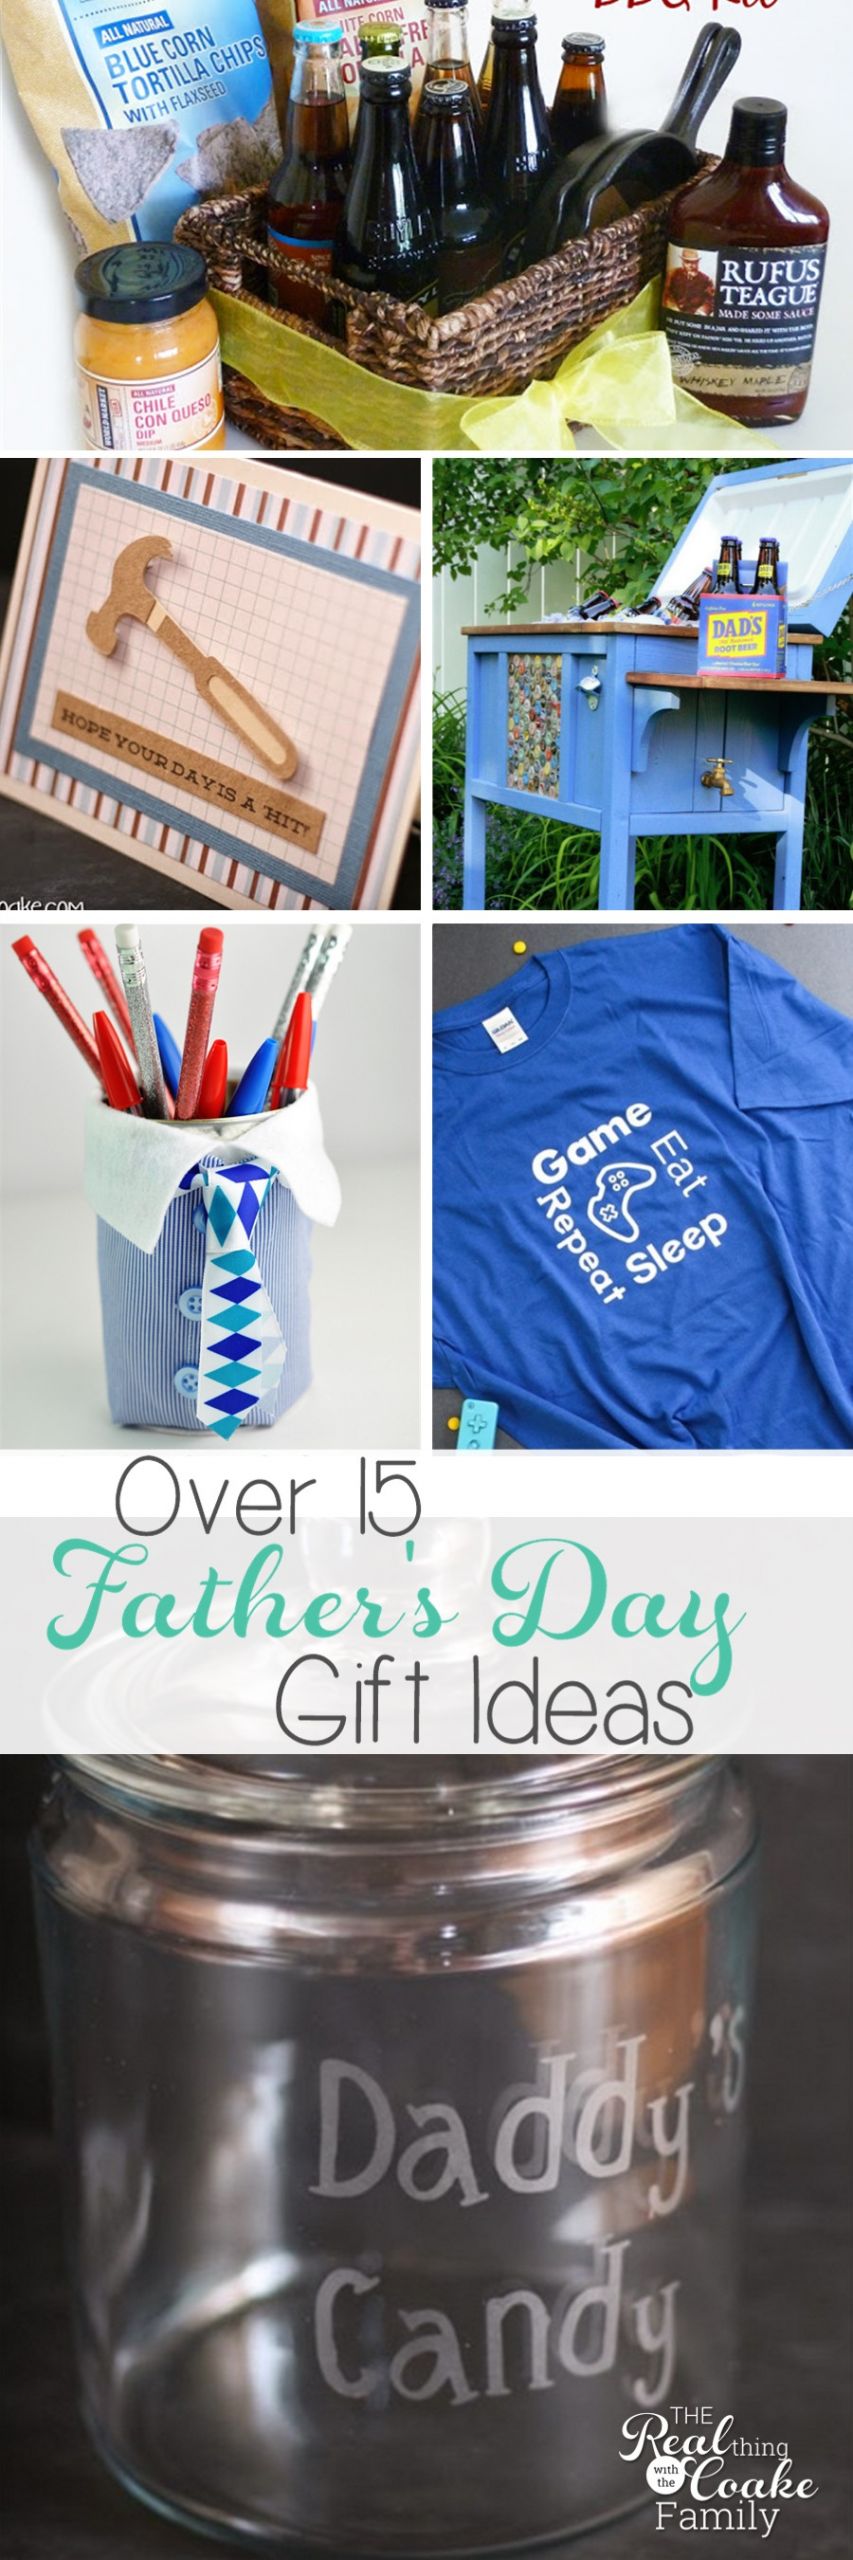 Grandfather'S Day Gift Ideas
 Over 15 Great Father’s Day Gift Ideas The Real Thing